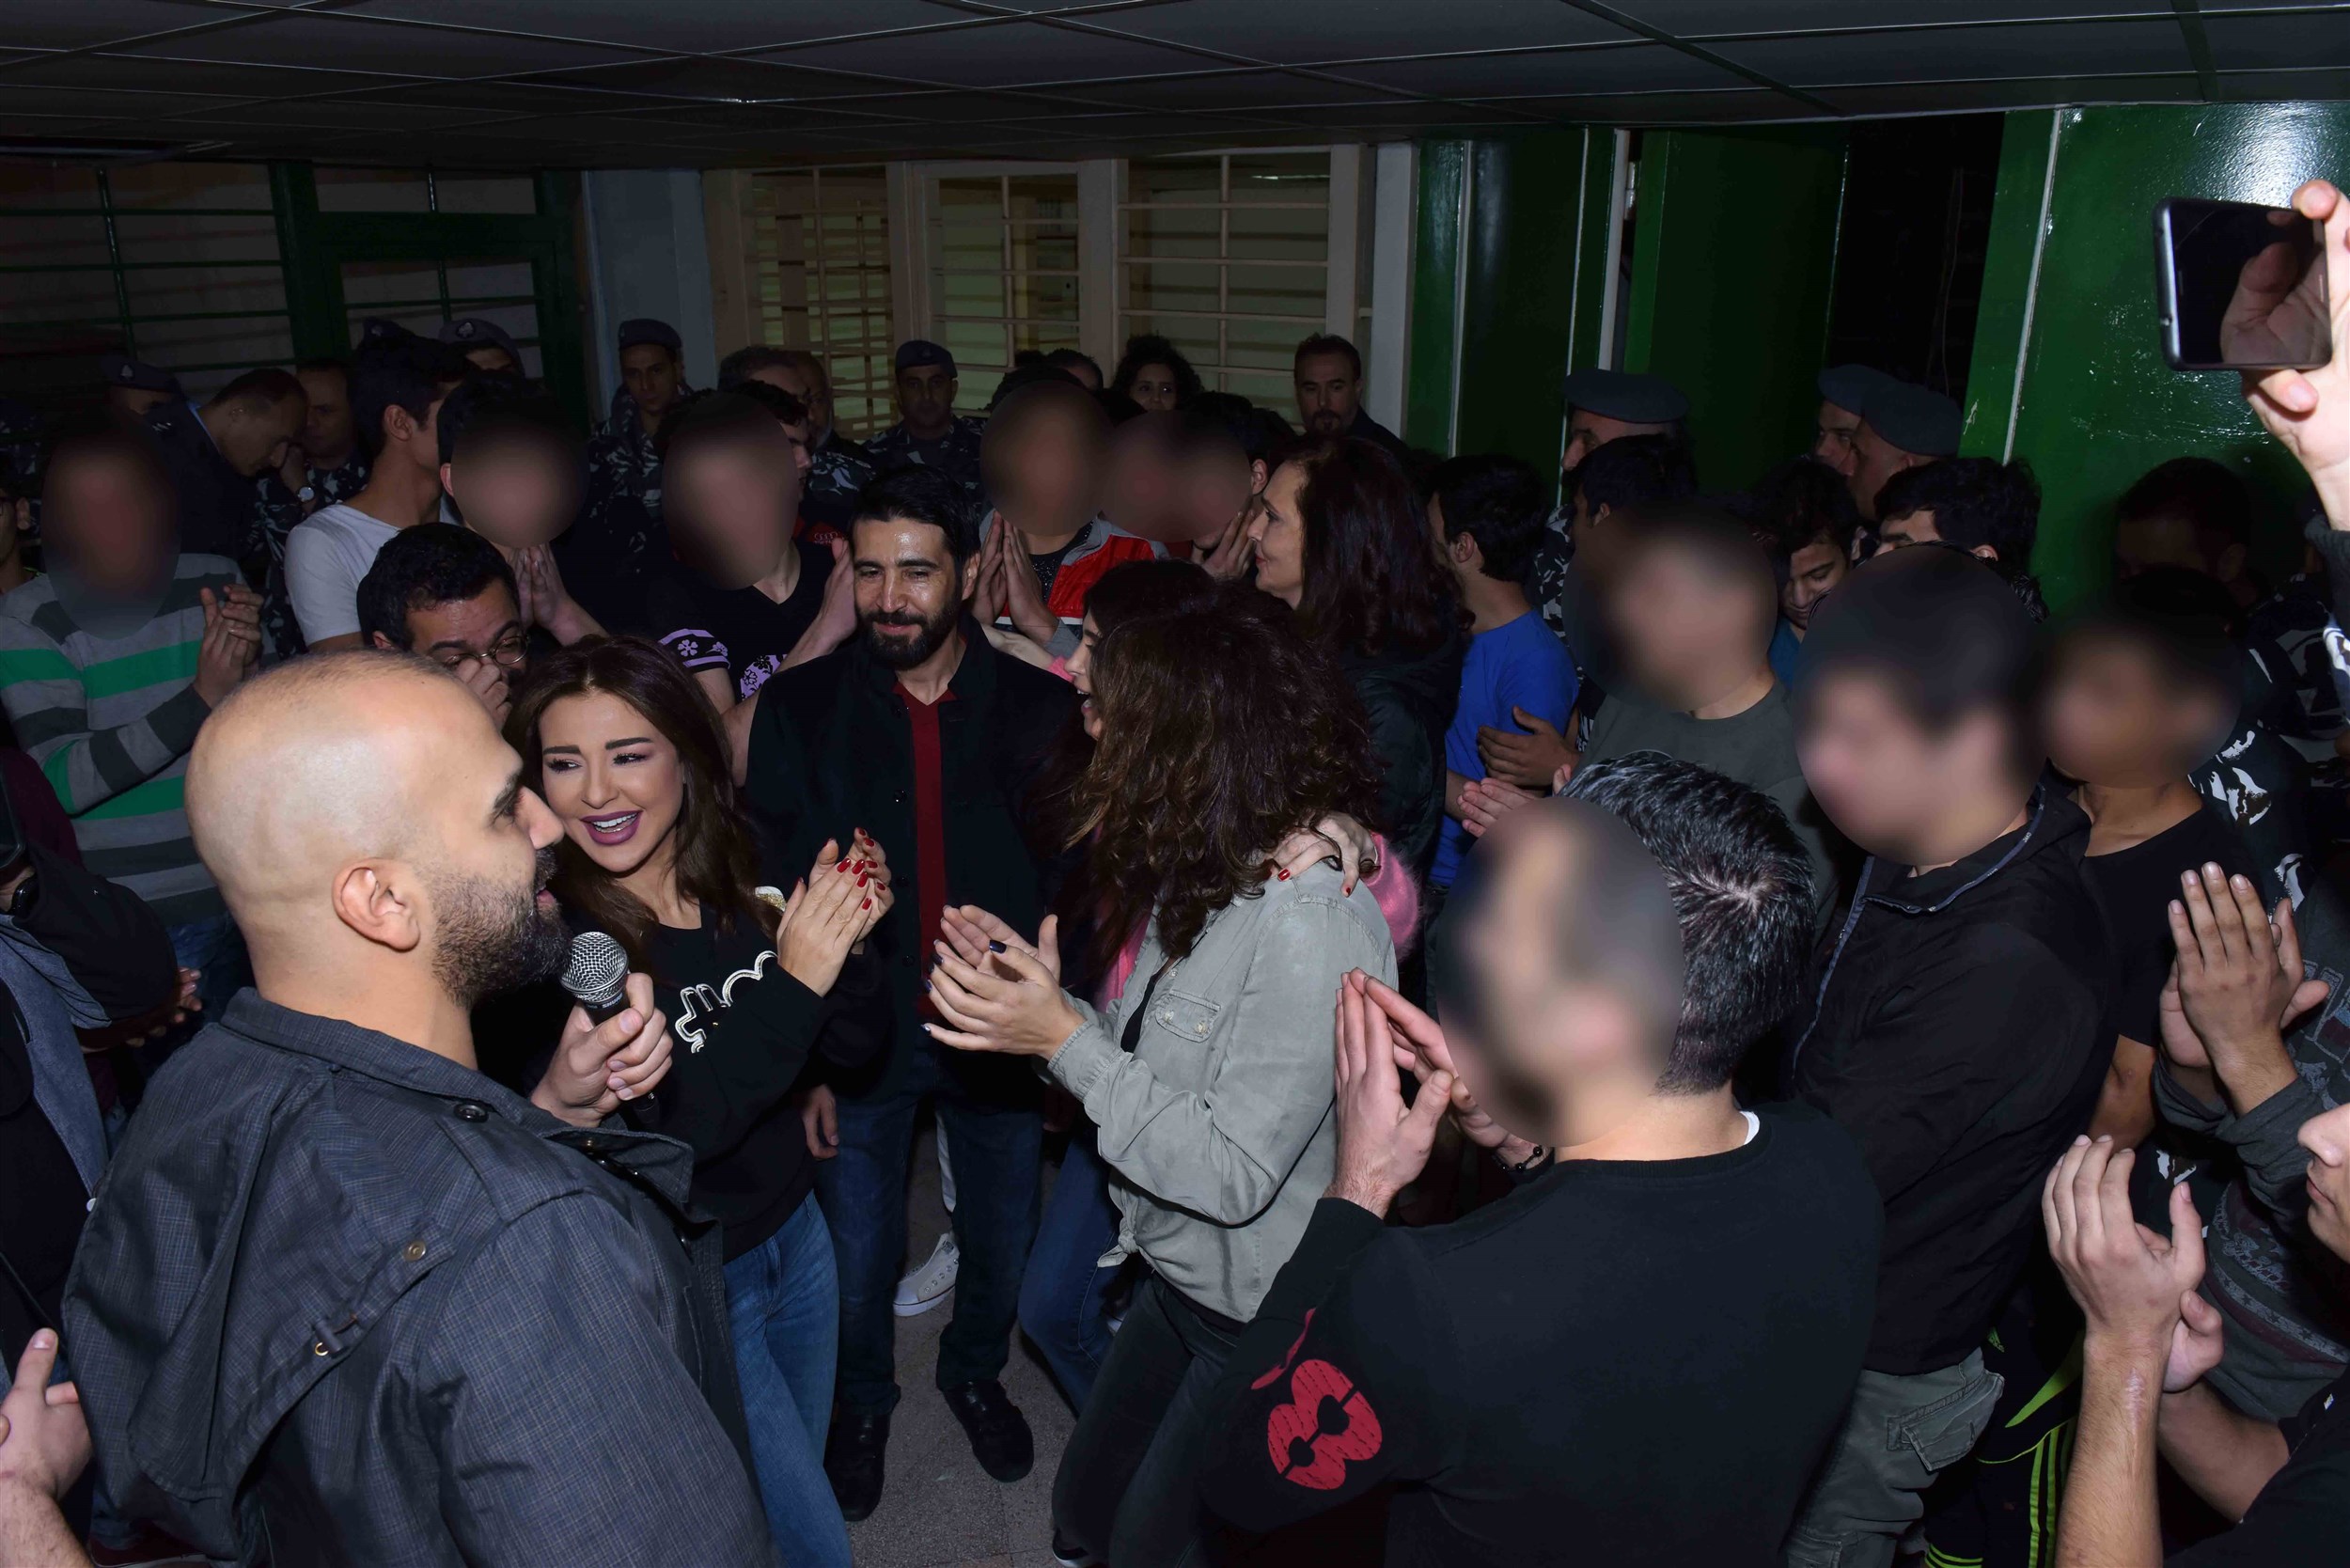 the celebrities, army officials and the juvenile inmates enjoying a celebratory occasion and dancing together while the singer naji osta is singing.